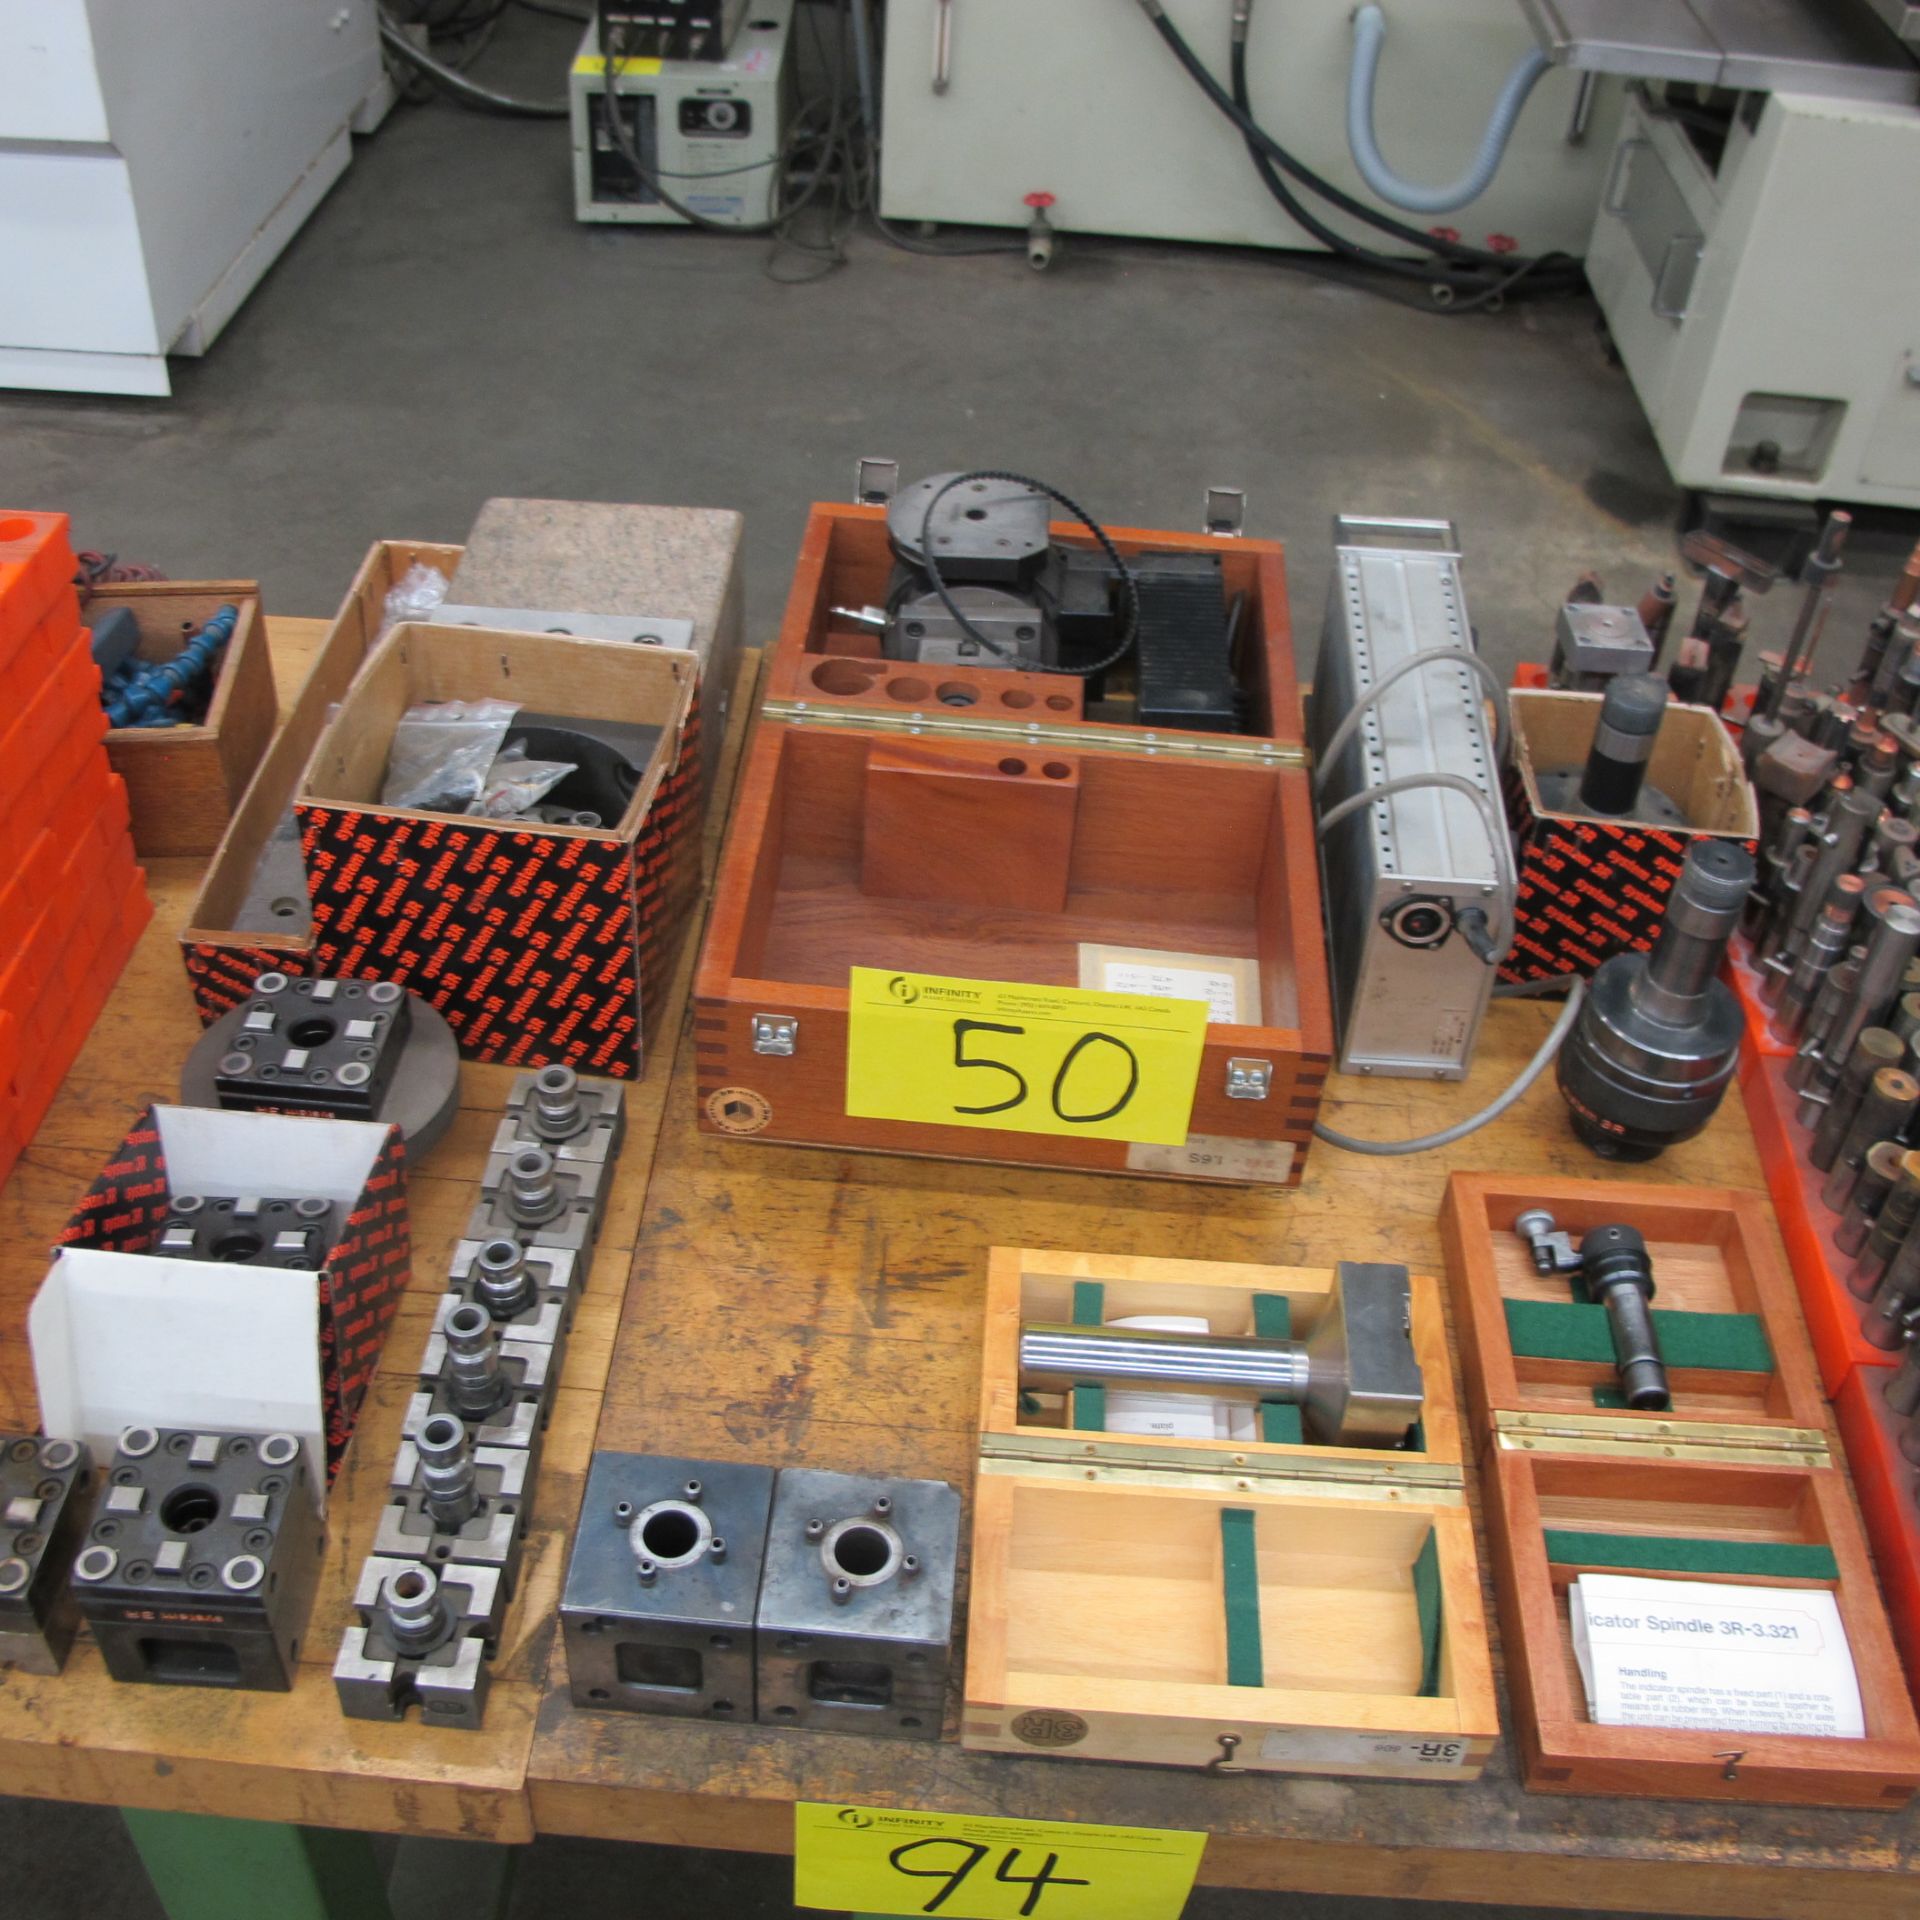 LOT OF SYSTEM R3 EDM BLOCKS, TRAYS, SPINDLES, SPEED CONTROLLER AND ELECTRODES - Image 5 of 6